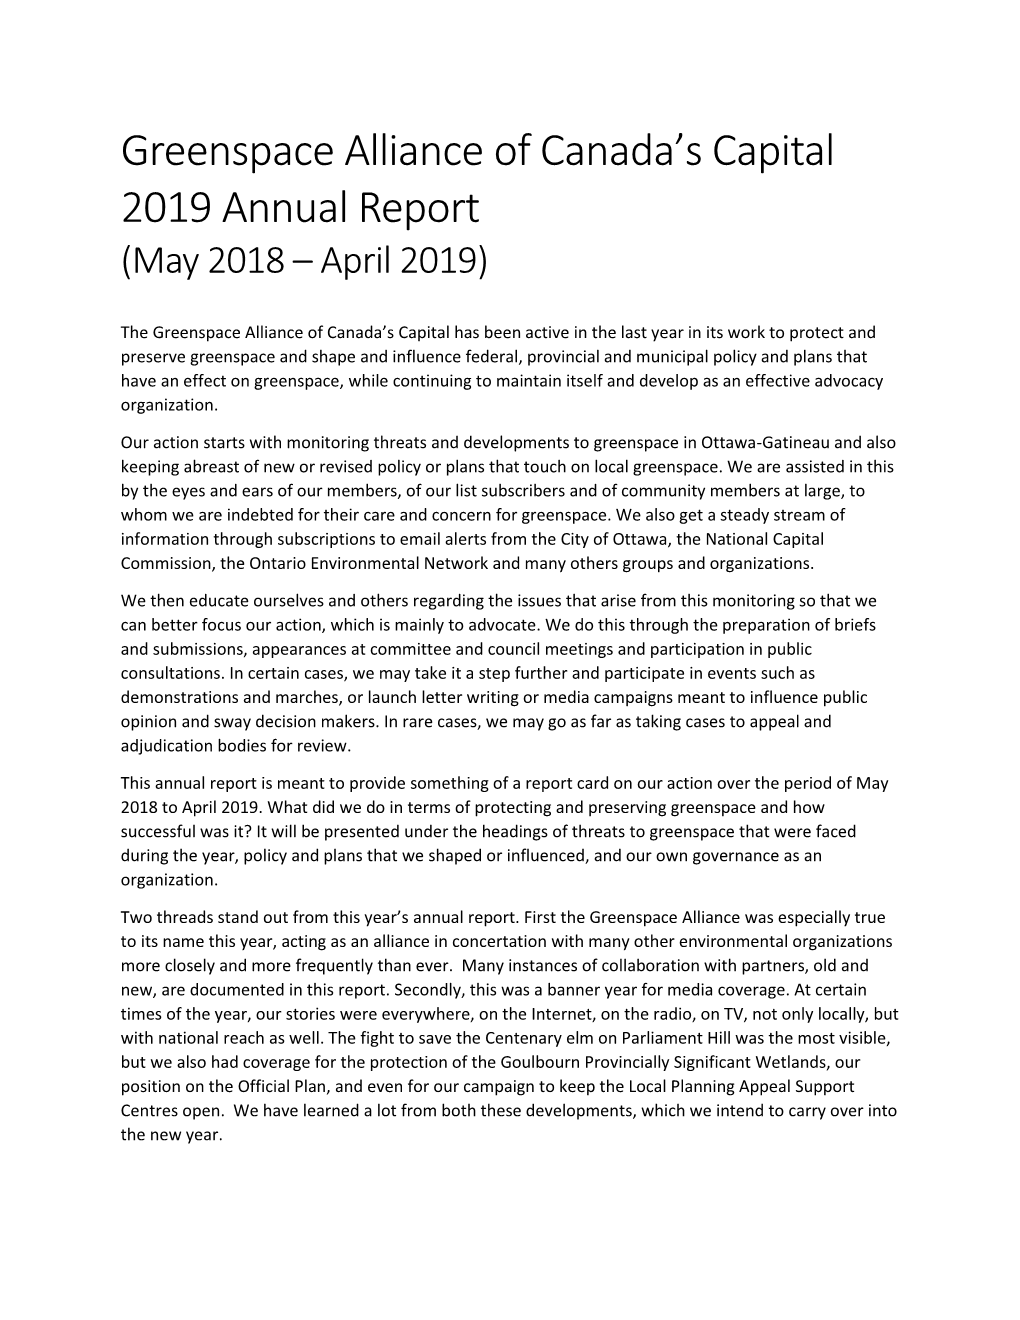 Greenspace Alliance of Canada's Capital 2019 Annual Report